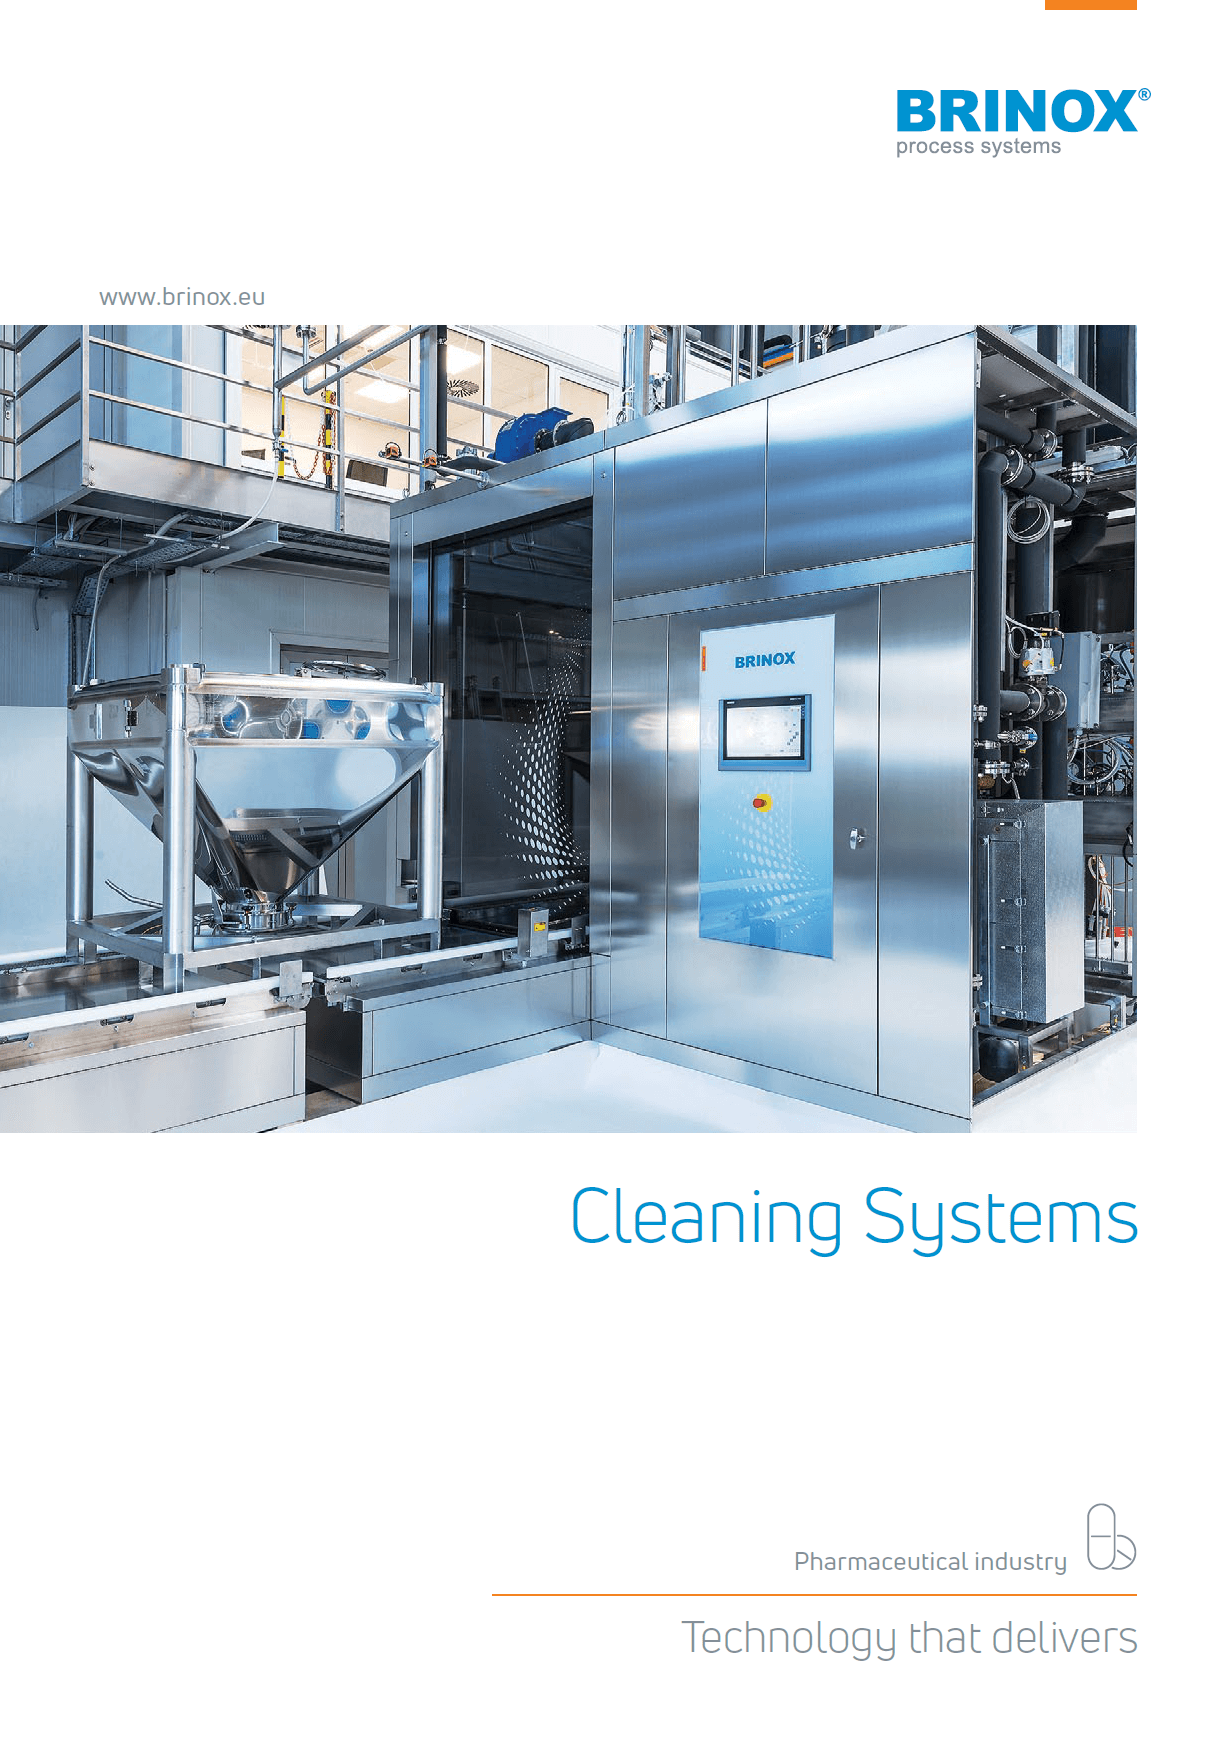 Cleaning system